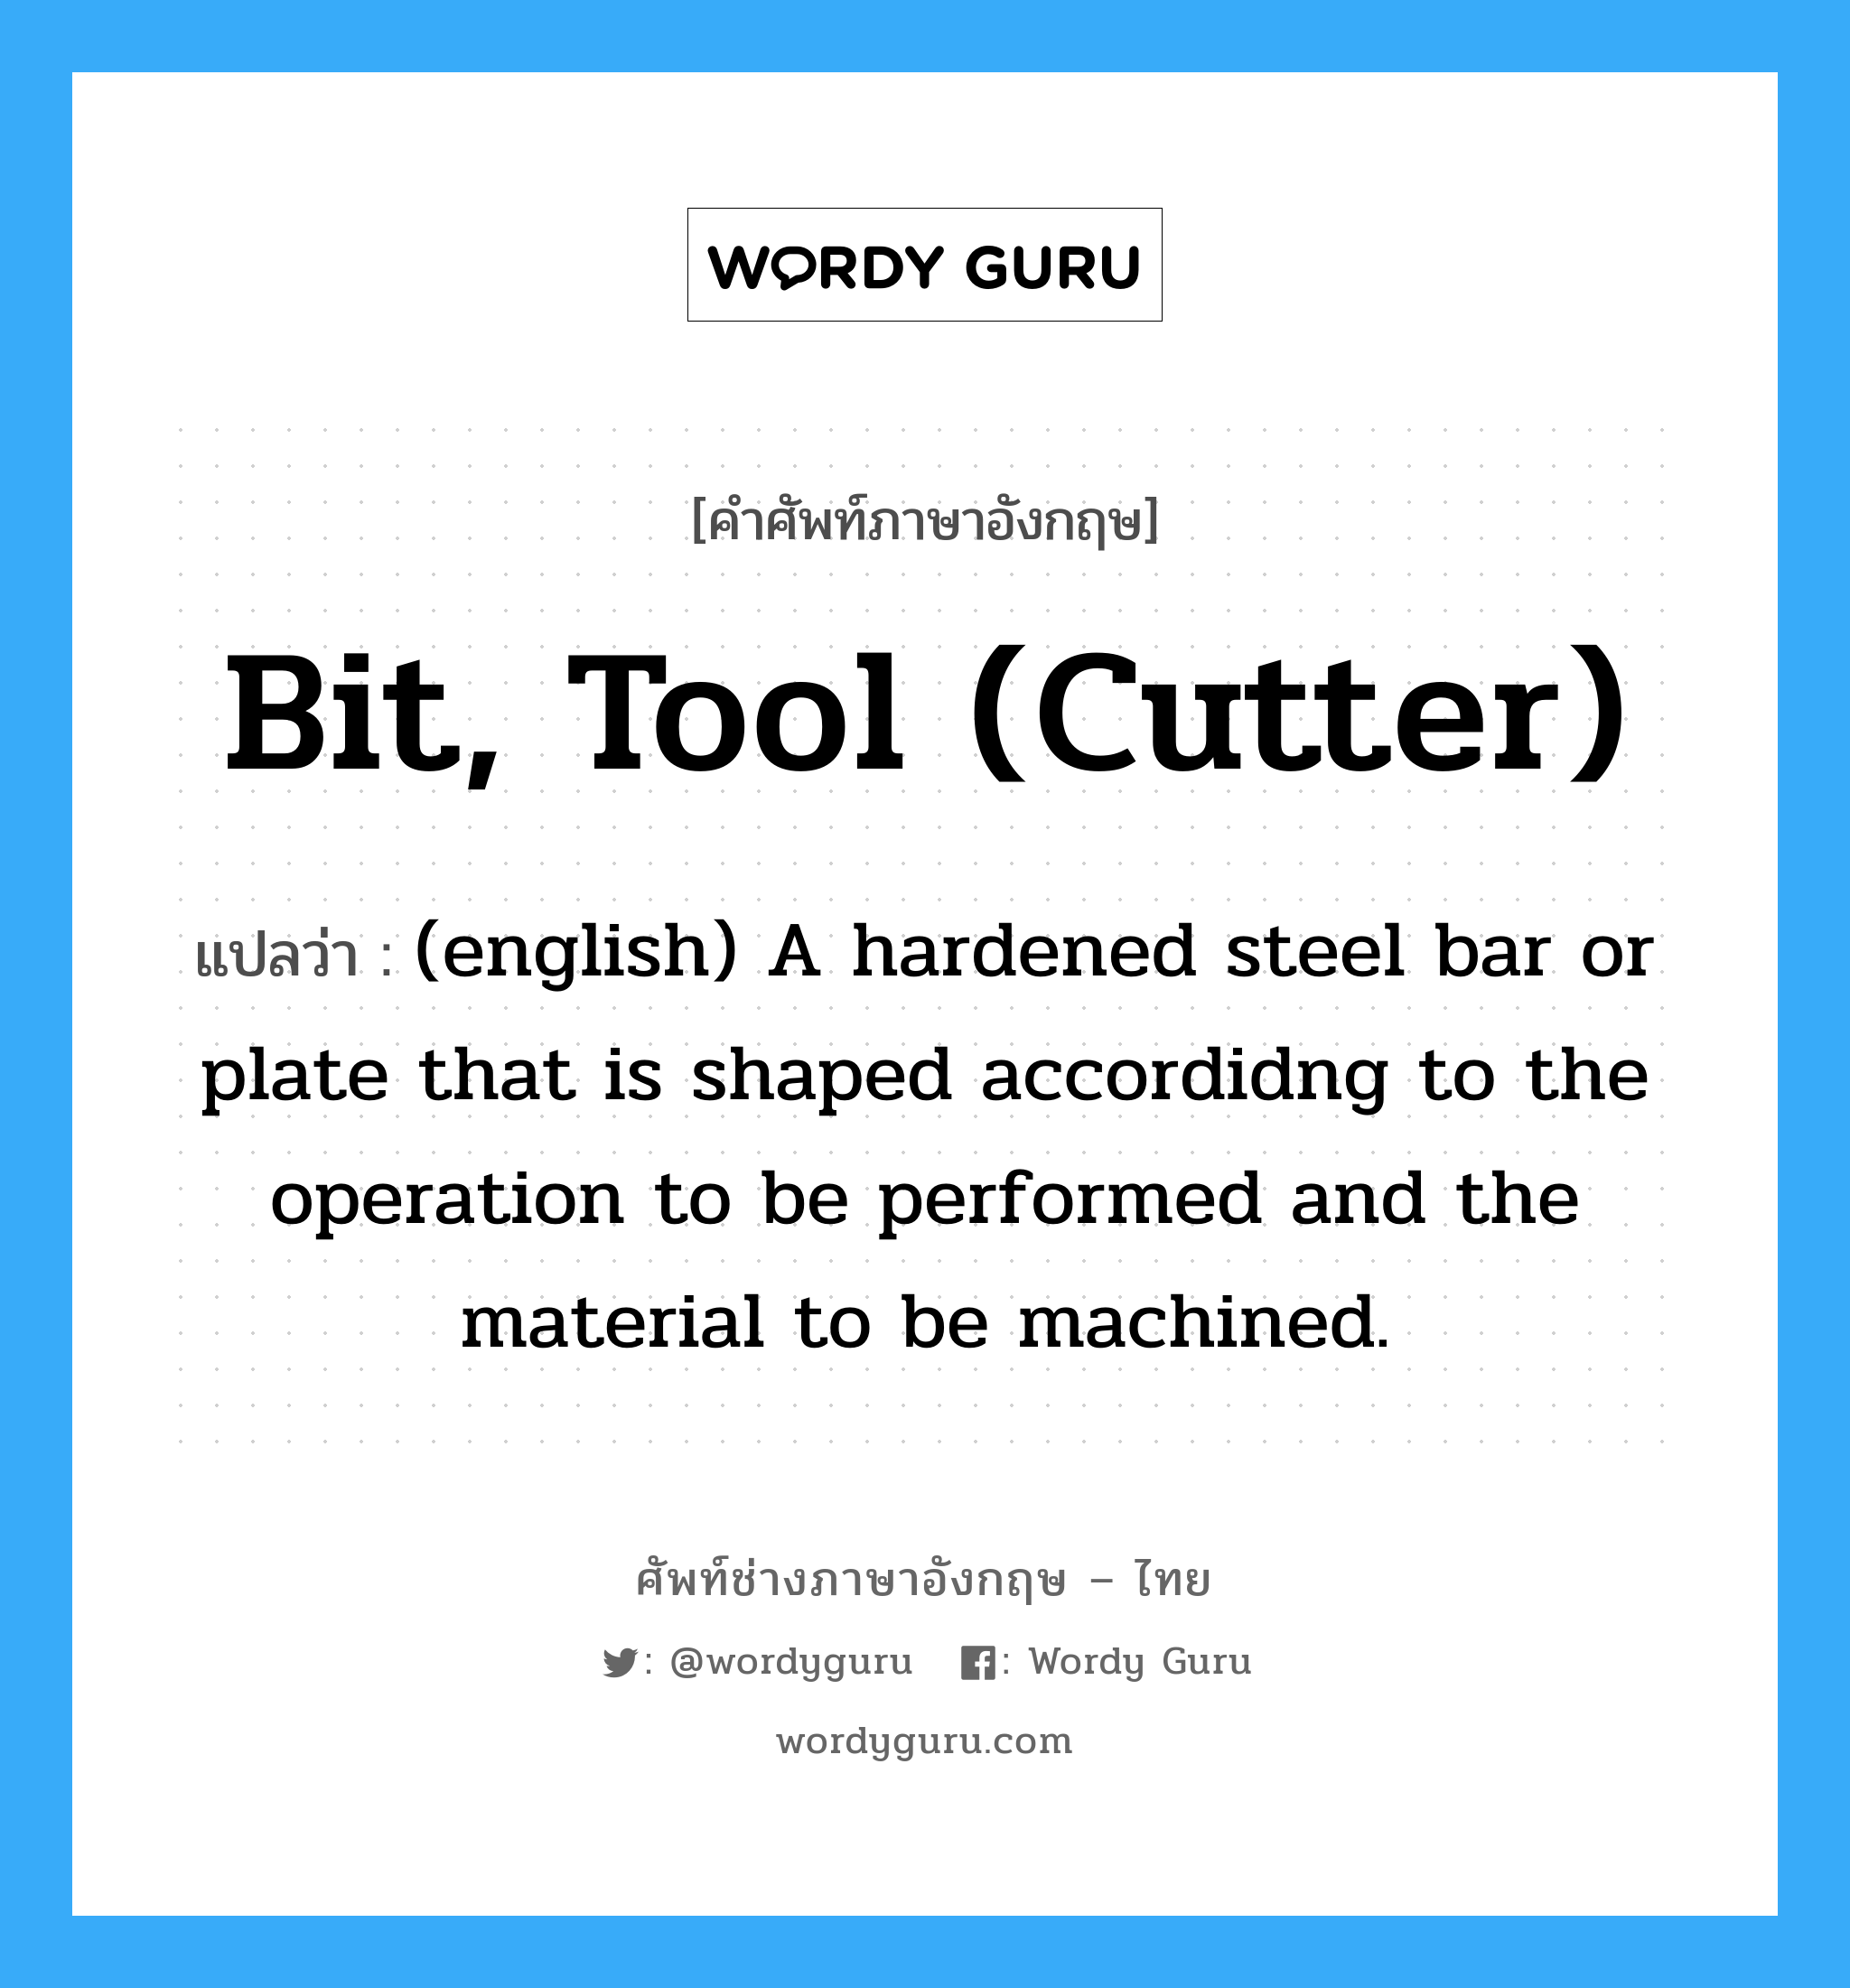 (english) A hardened steel bar or plate that is shaped accordidng to the operation to be performed and the material to be machined. ภาษาอังกฤษ?, คำศัพท์ช่างภาษาอังกฤษ - ไทย (english) A hardened steel bar or plate that is shaped accordidng to the operation to be performed and the material to be machined. คำศัพท์ภาษาอังกฤษ (english) A hardened steel bar or plate that is shaped accordidng to the operation to be performed and the material to be machined. แปลว่า Bit, Tool (cutter)